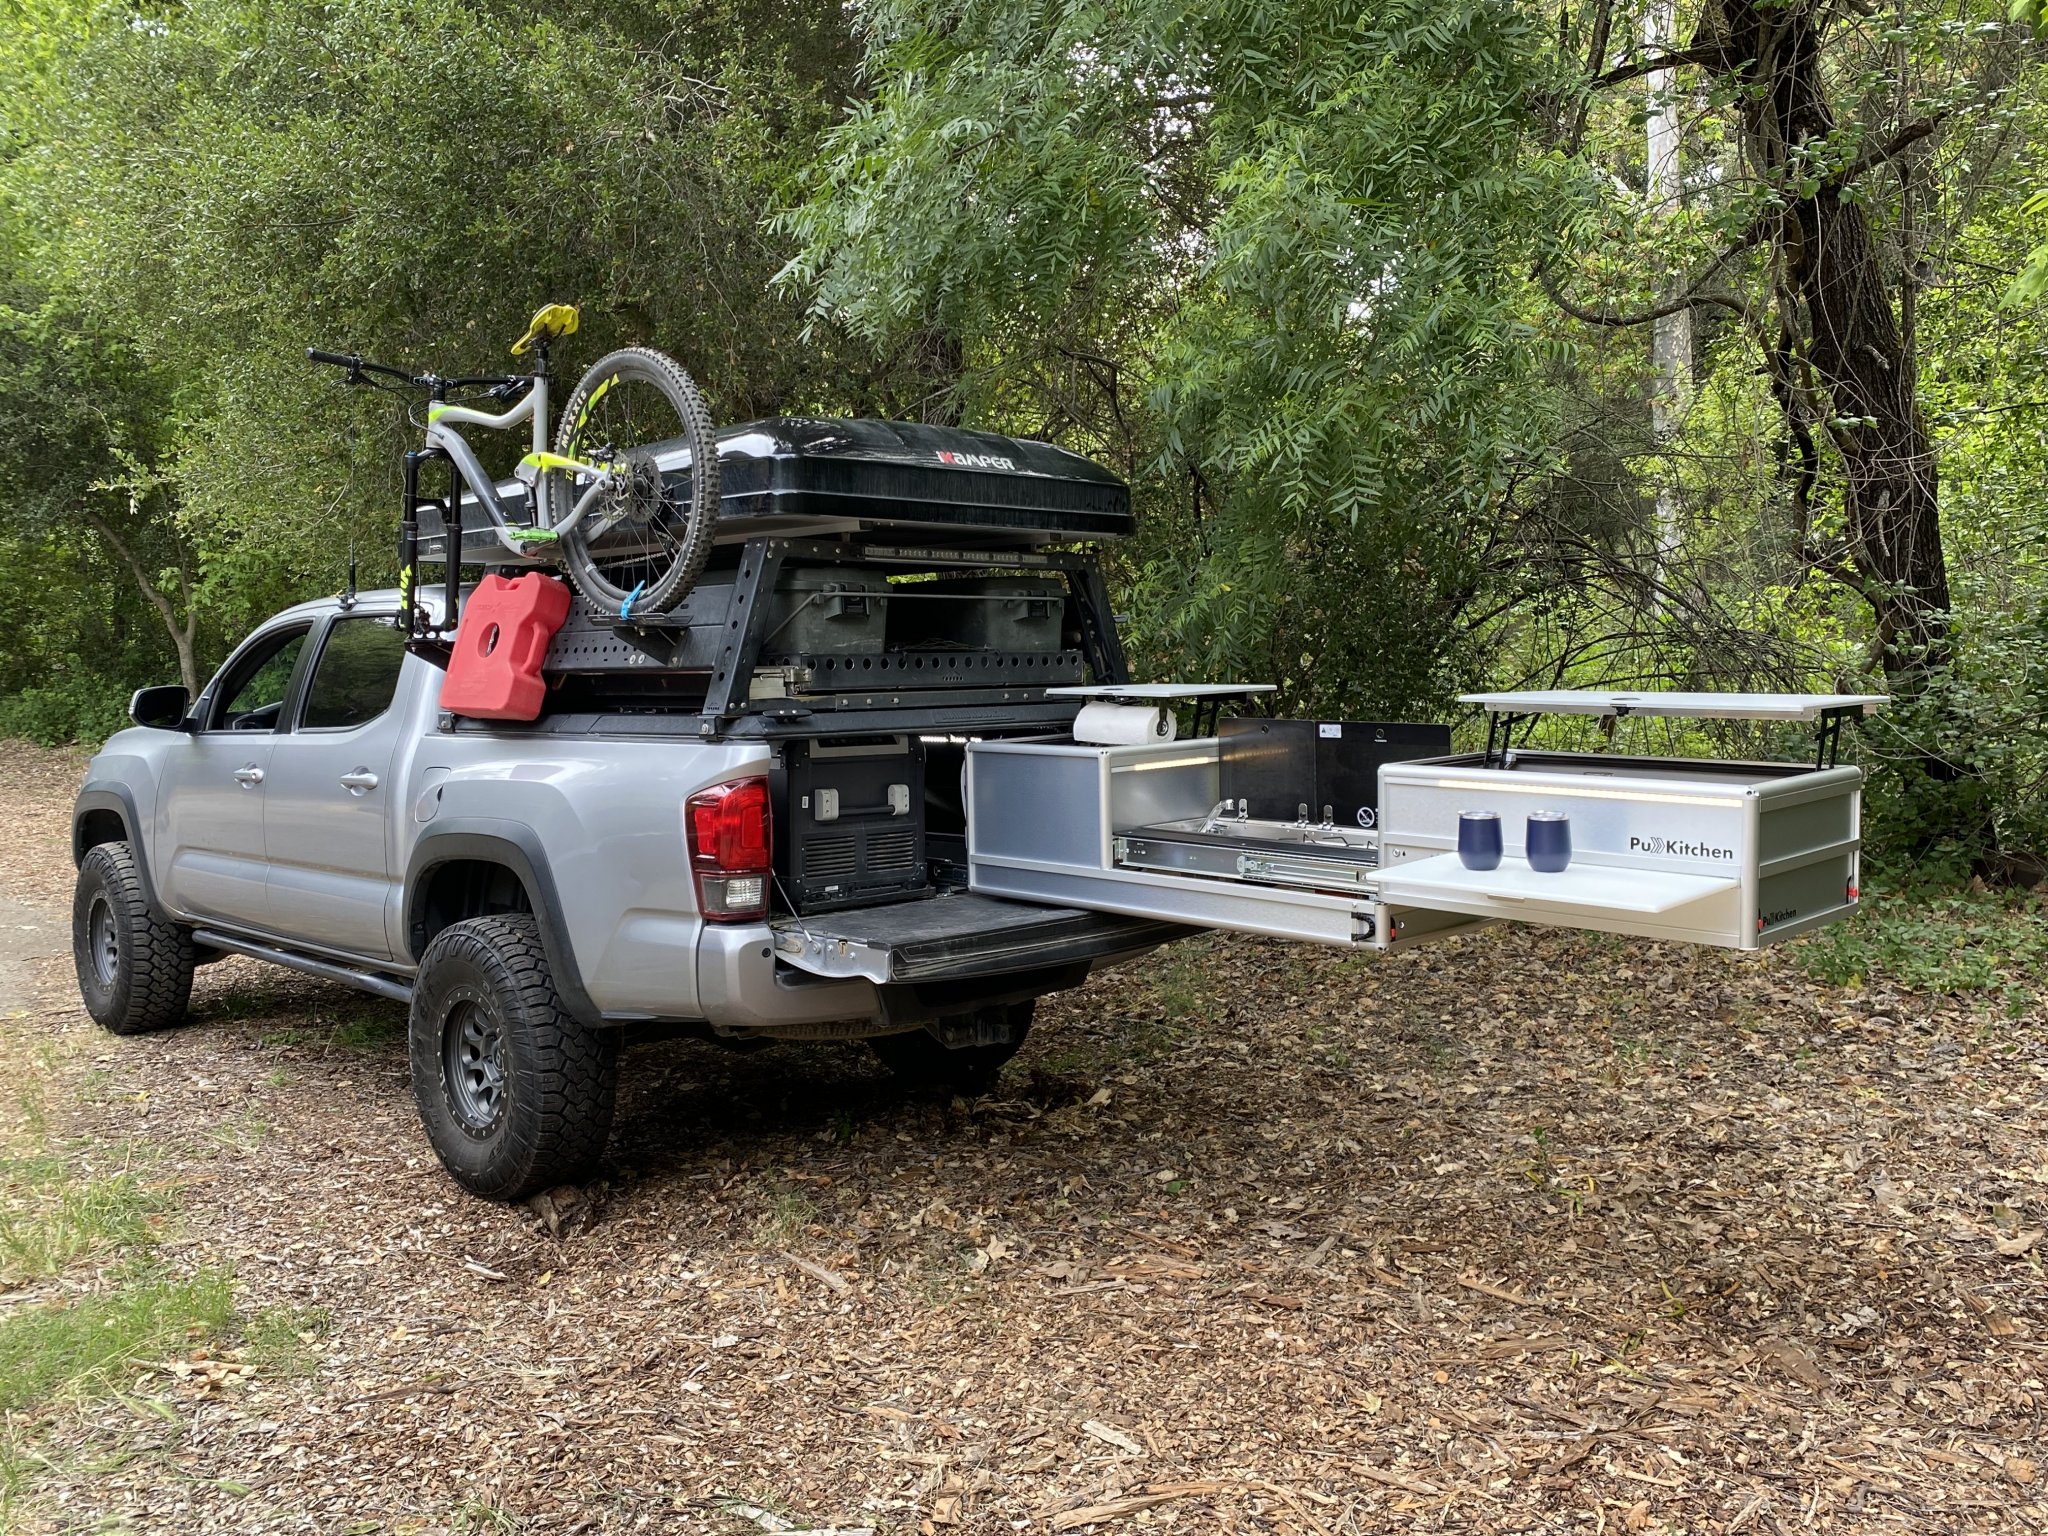 A fully outfitted adventure truck.